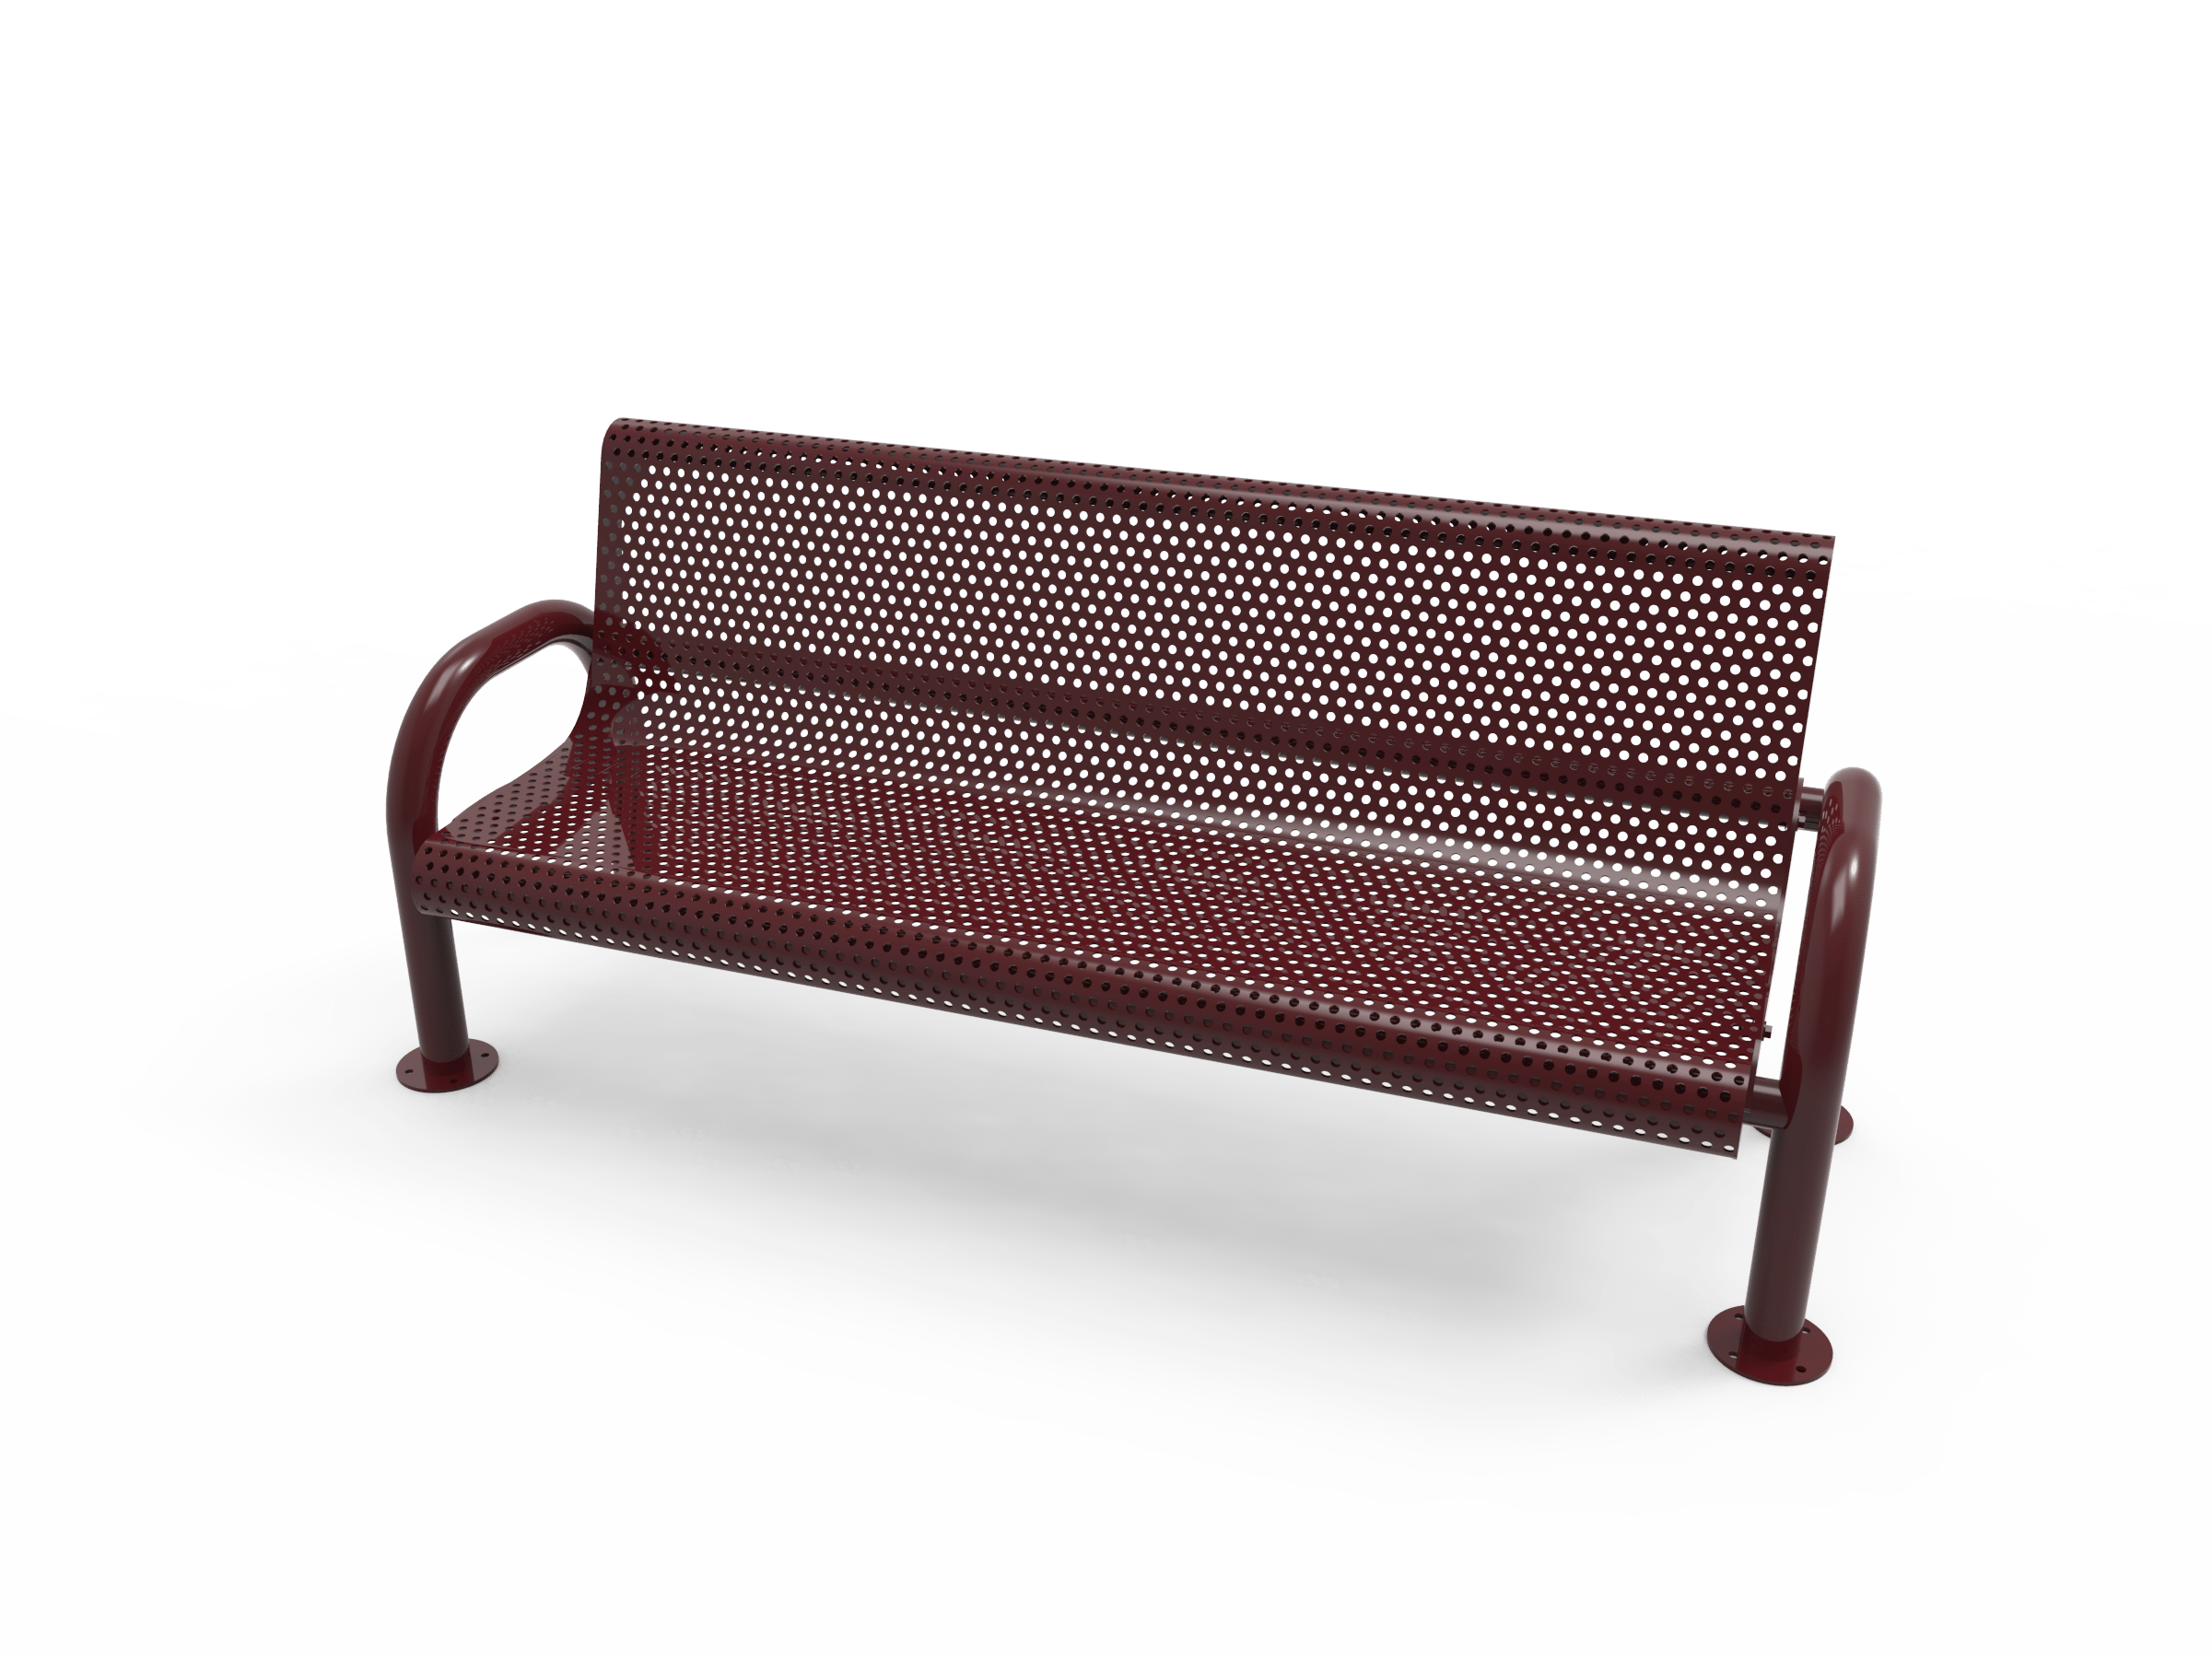 4′ Bench With Back  Surface-Punched
BMD04-D-54-000
Industry Standard Finish
$1229.00
BMD04-B-54-000
Advantage Premium Finish
$1529.00
